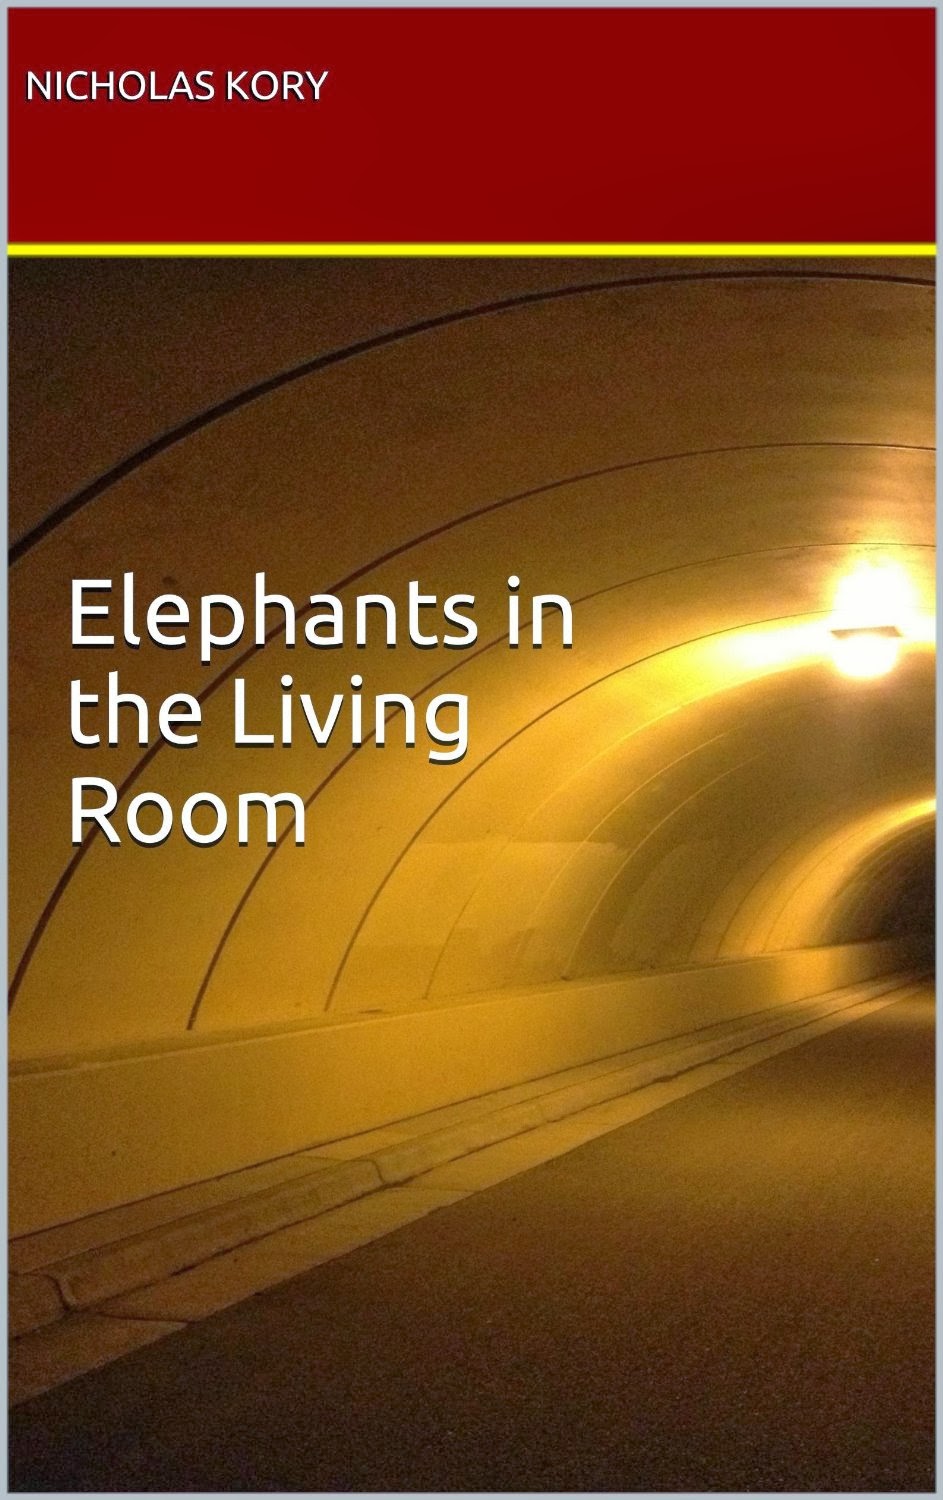  Buy or Sample Elephants in the Living Room on Amazon